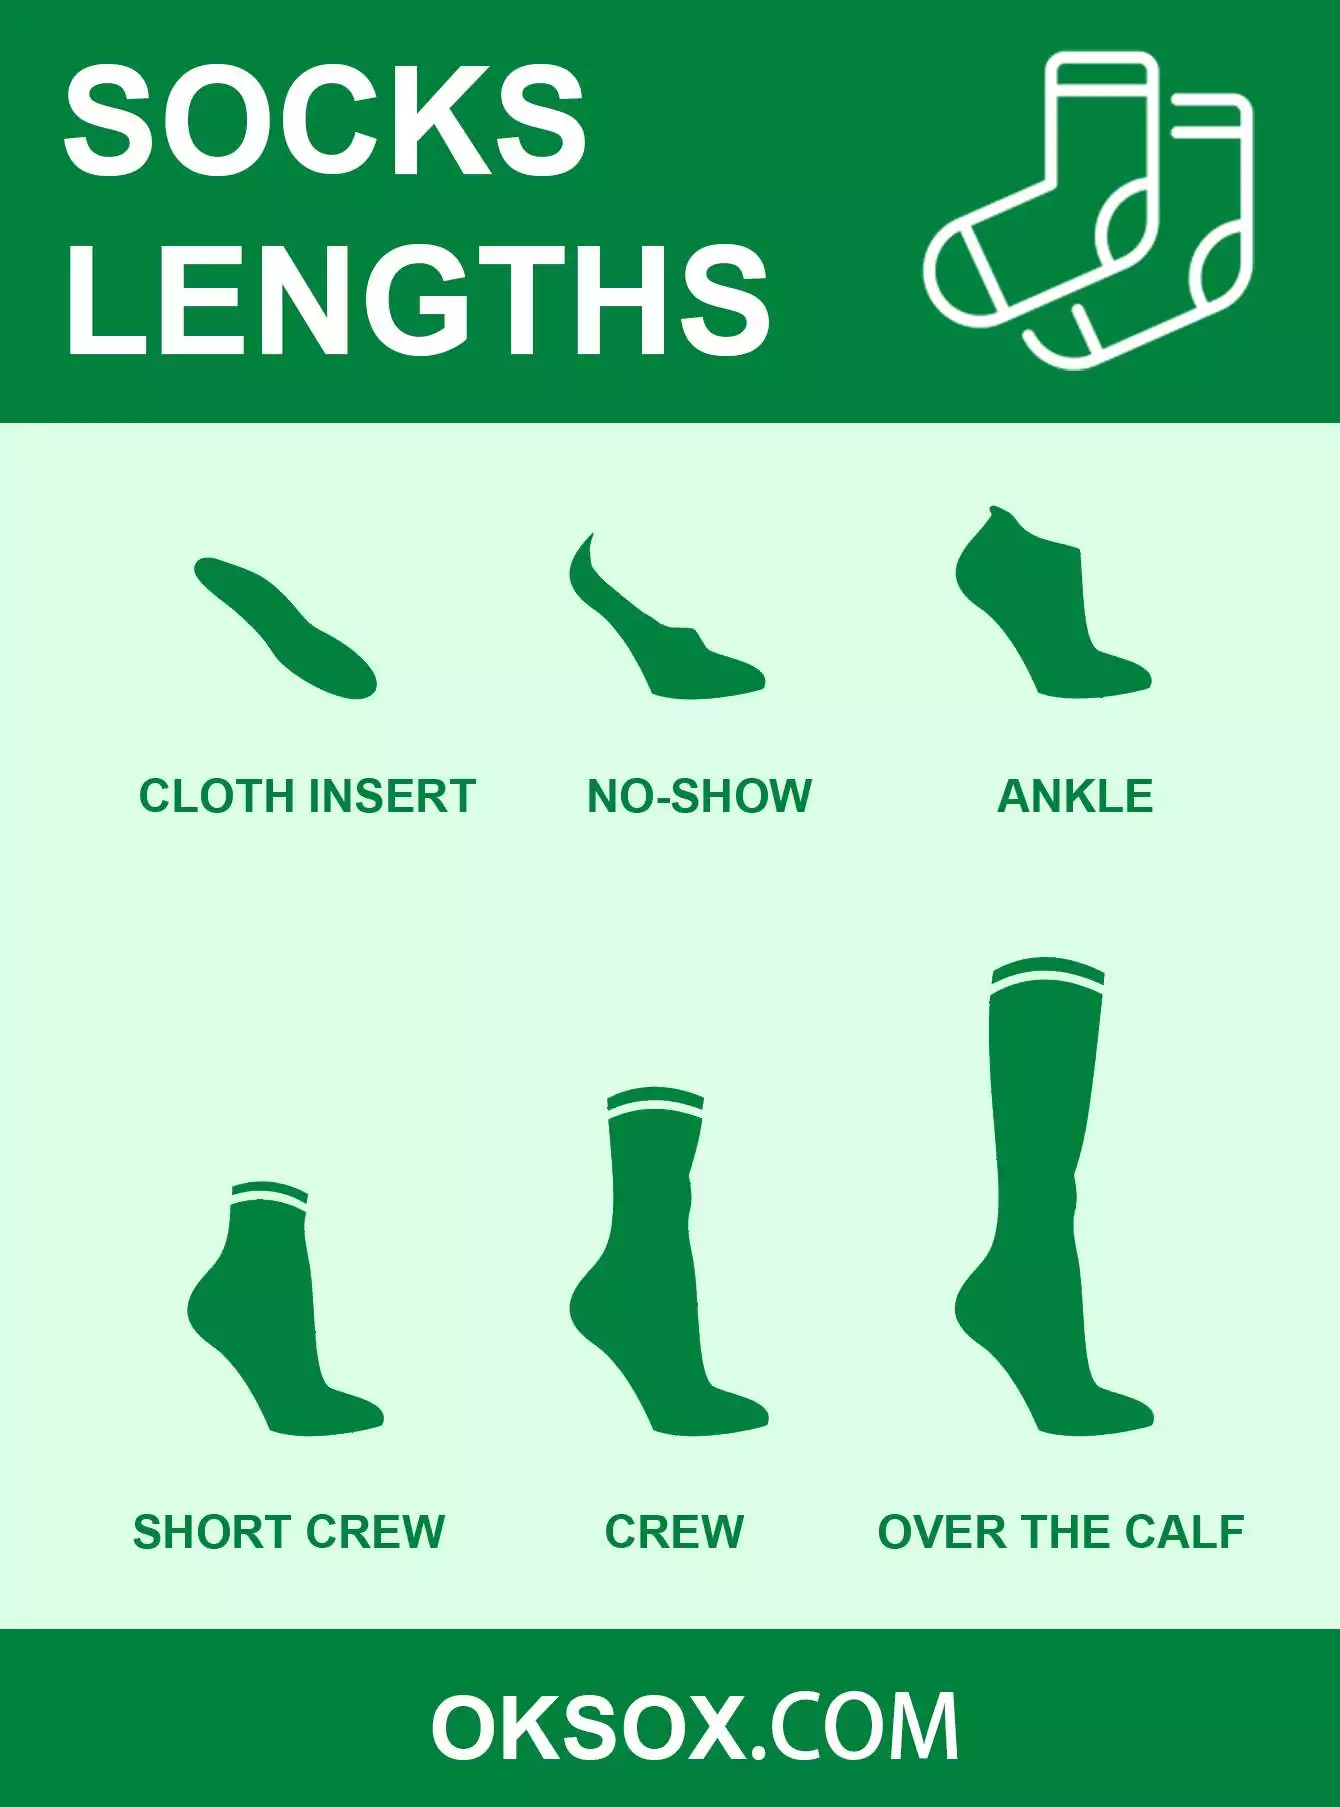 Socks Lengths show for free to pin or share